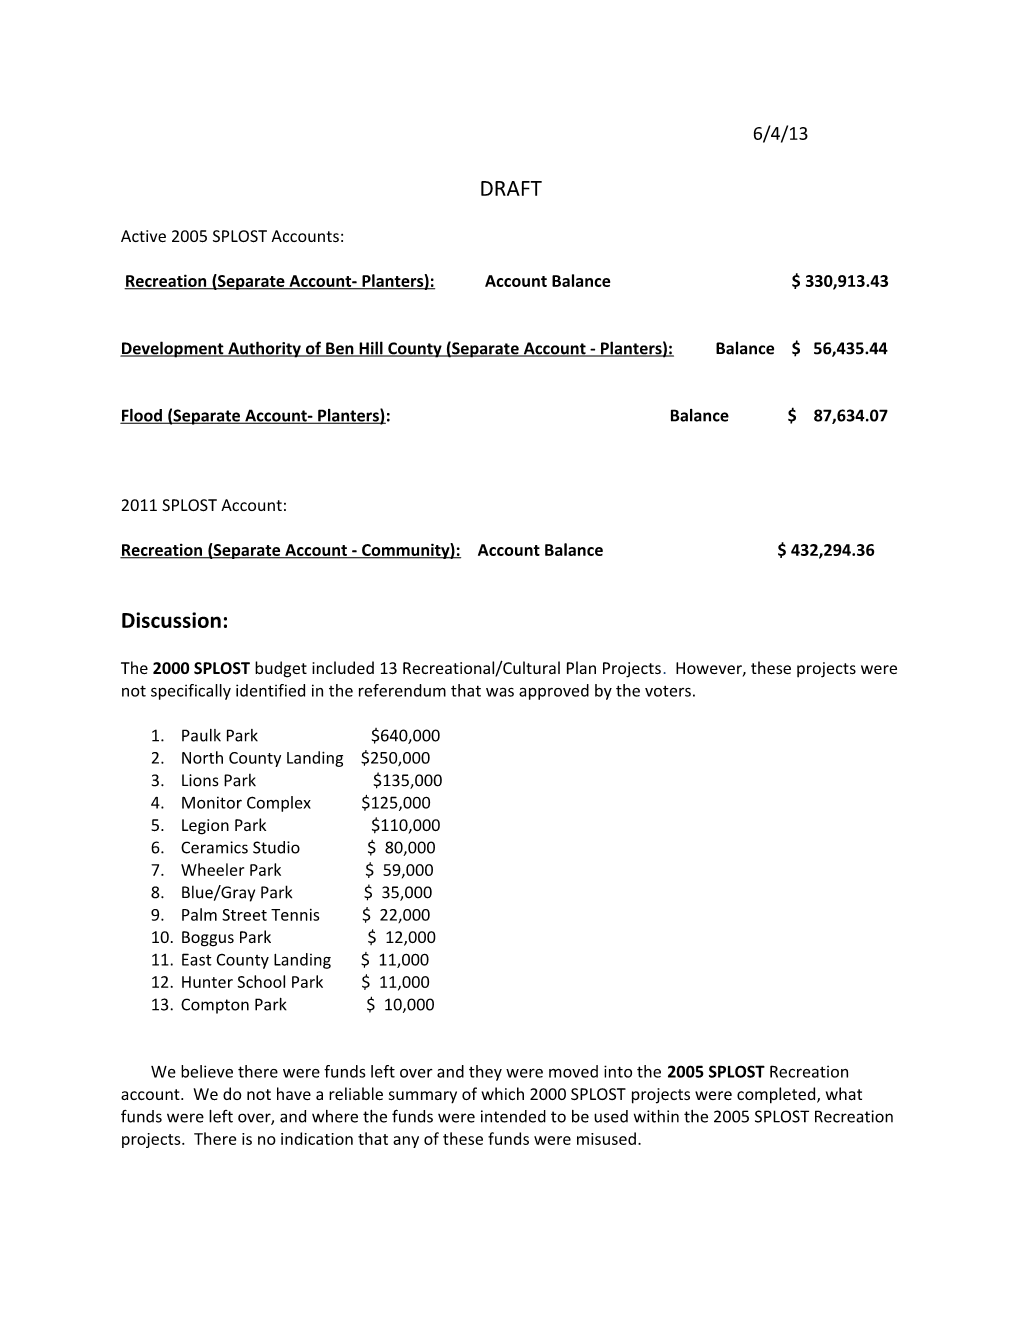 Development Authority of Ben Hill County (Separate Account - Planters):Balance $ 56,435.44